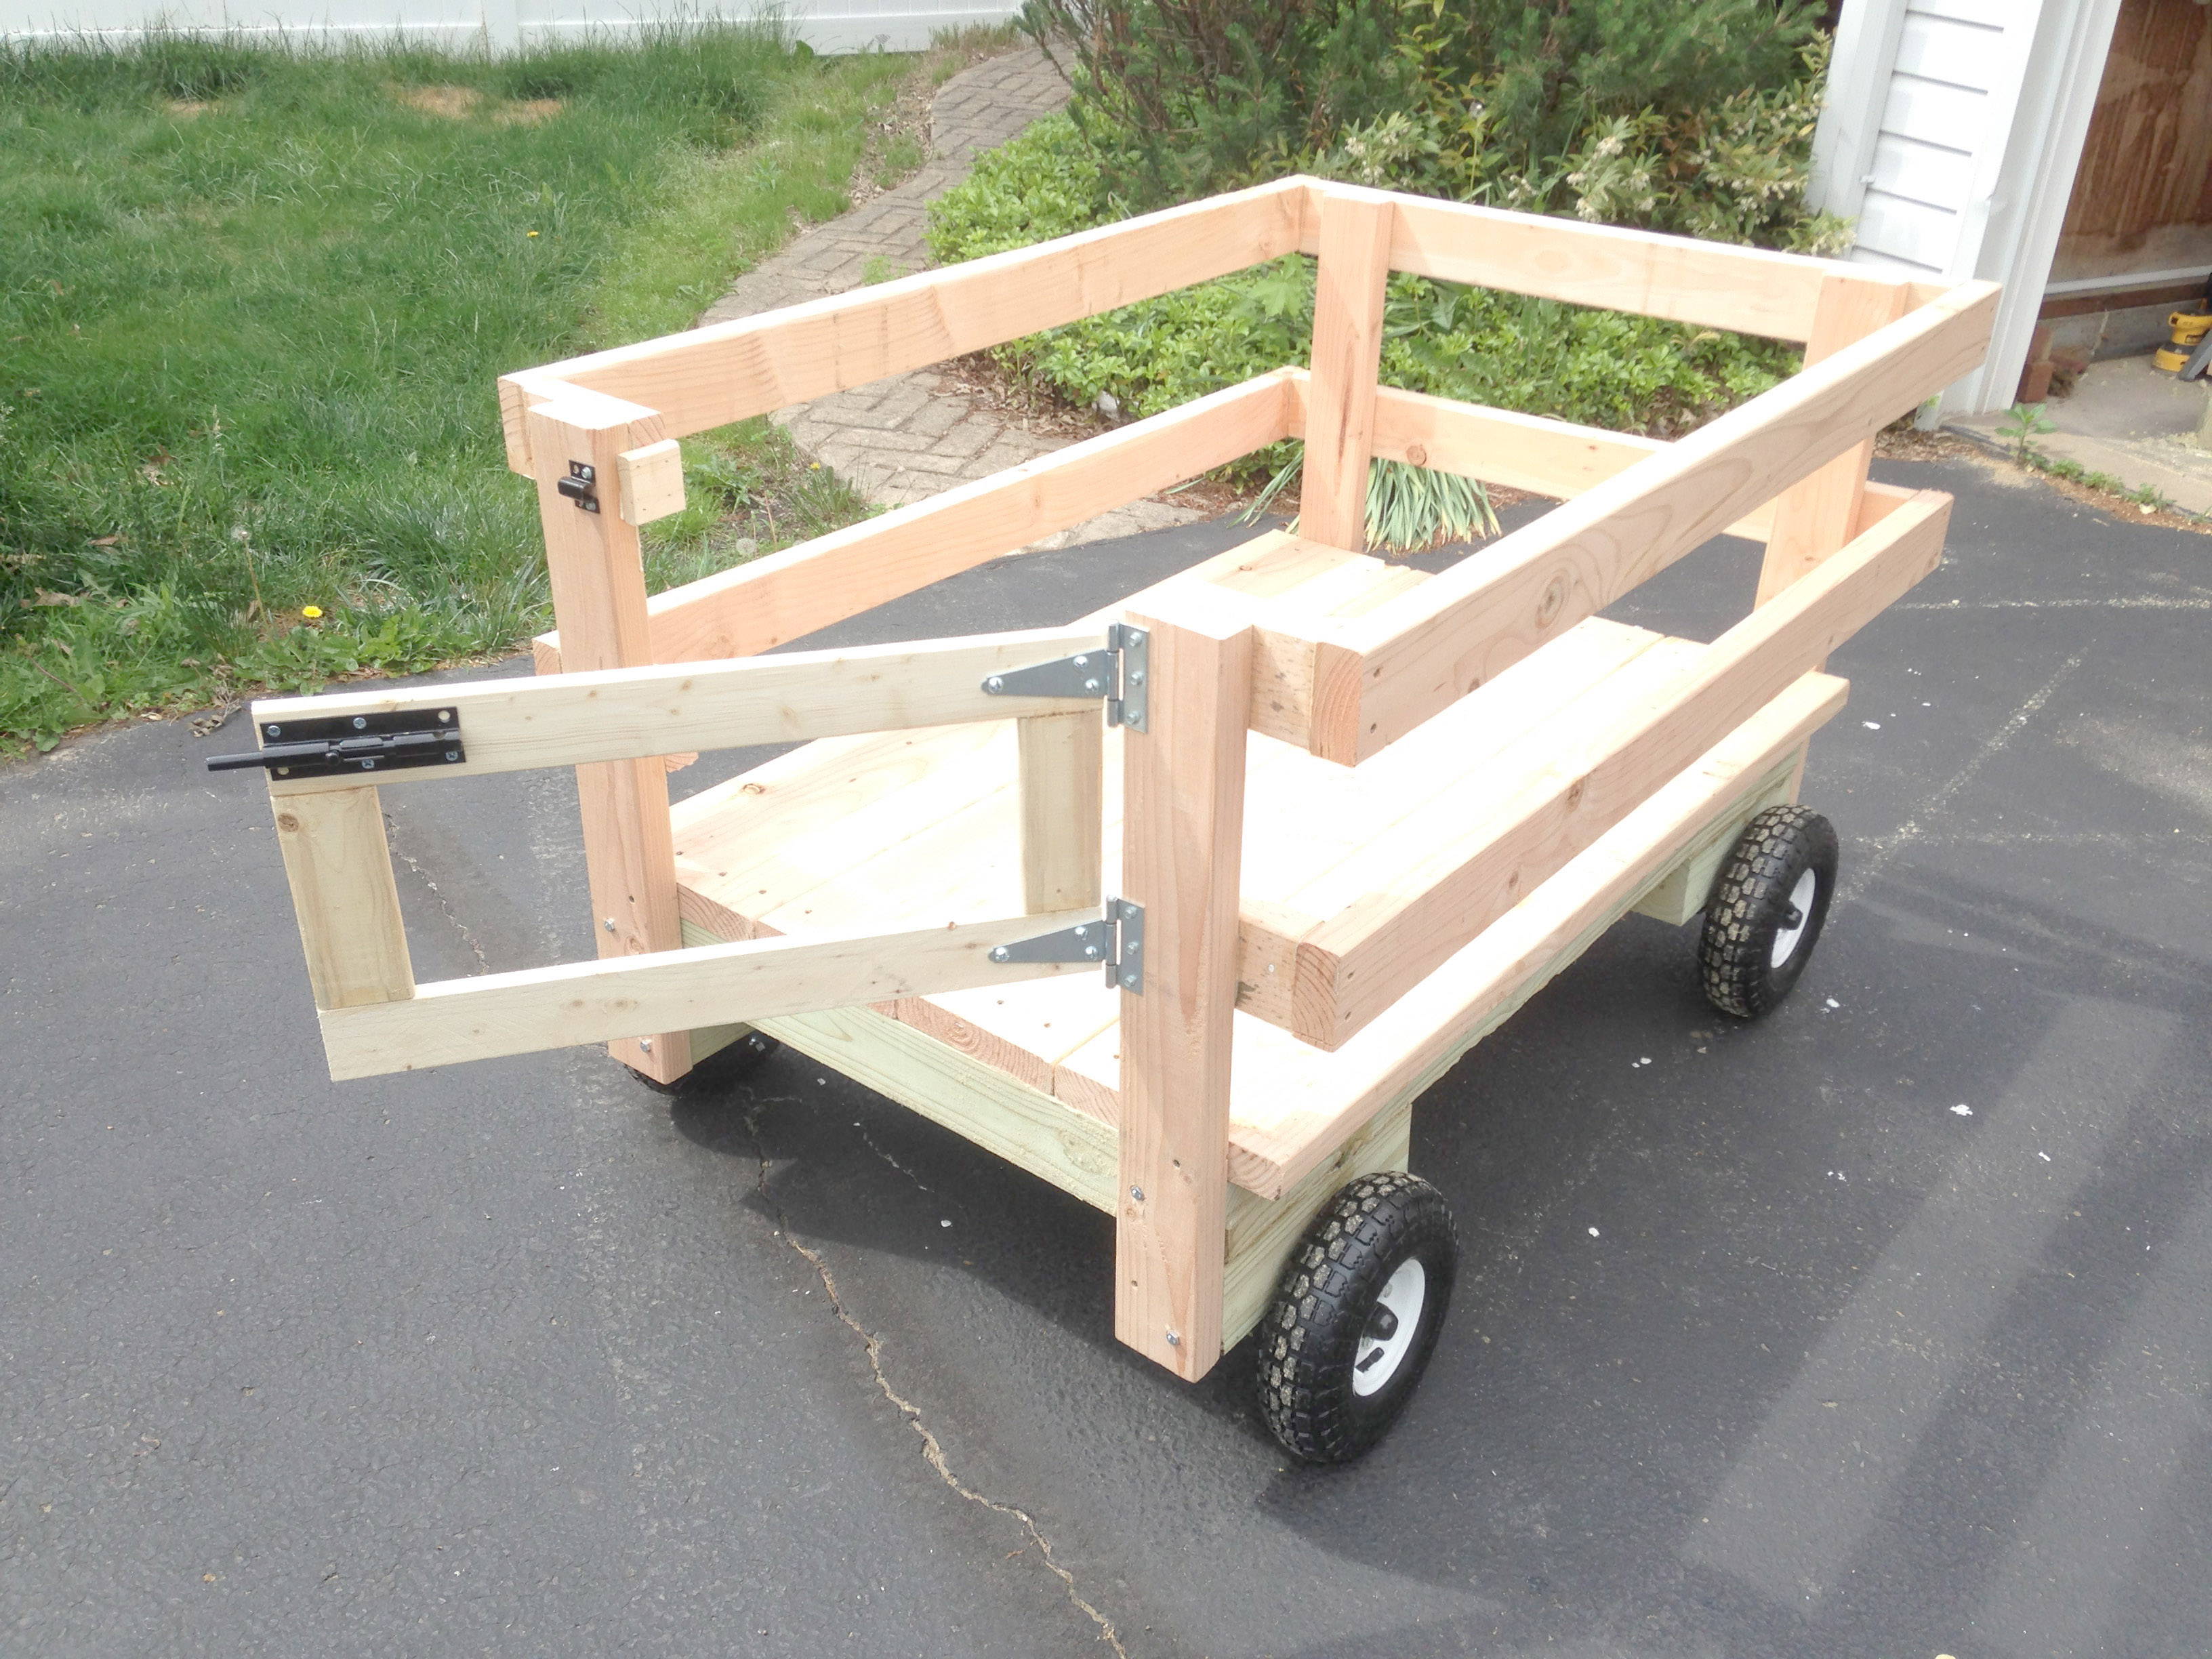 DIY wooden wagon utility cart with gate and simple wagon steering